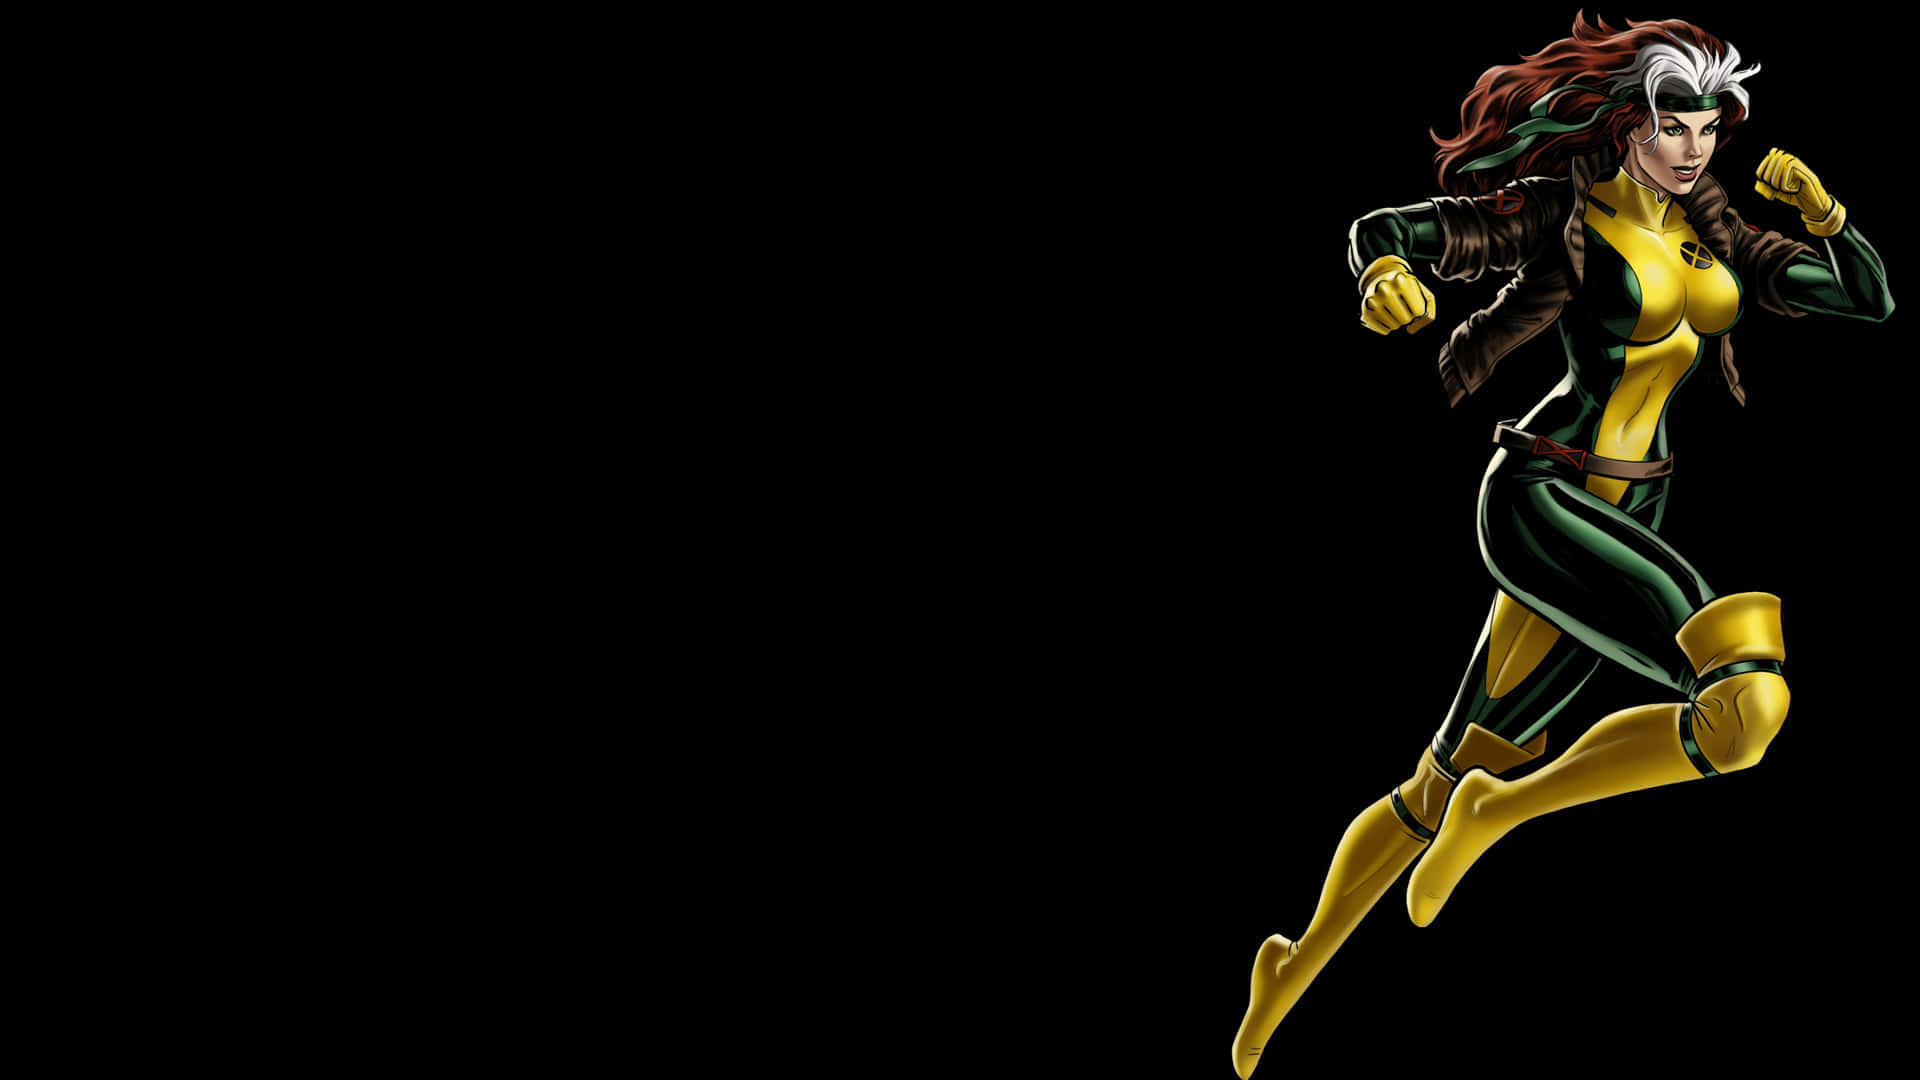 A Female Superhero In Yellow And Green Costume Running Background